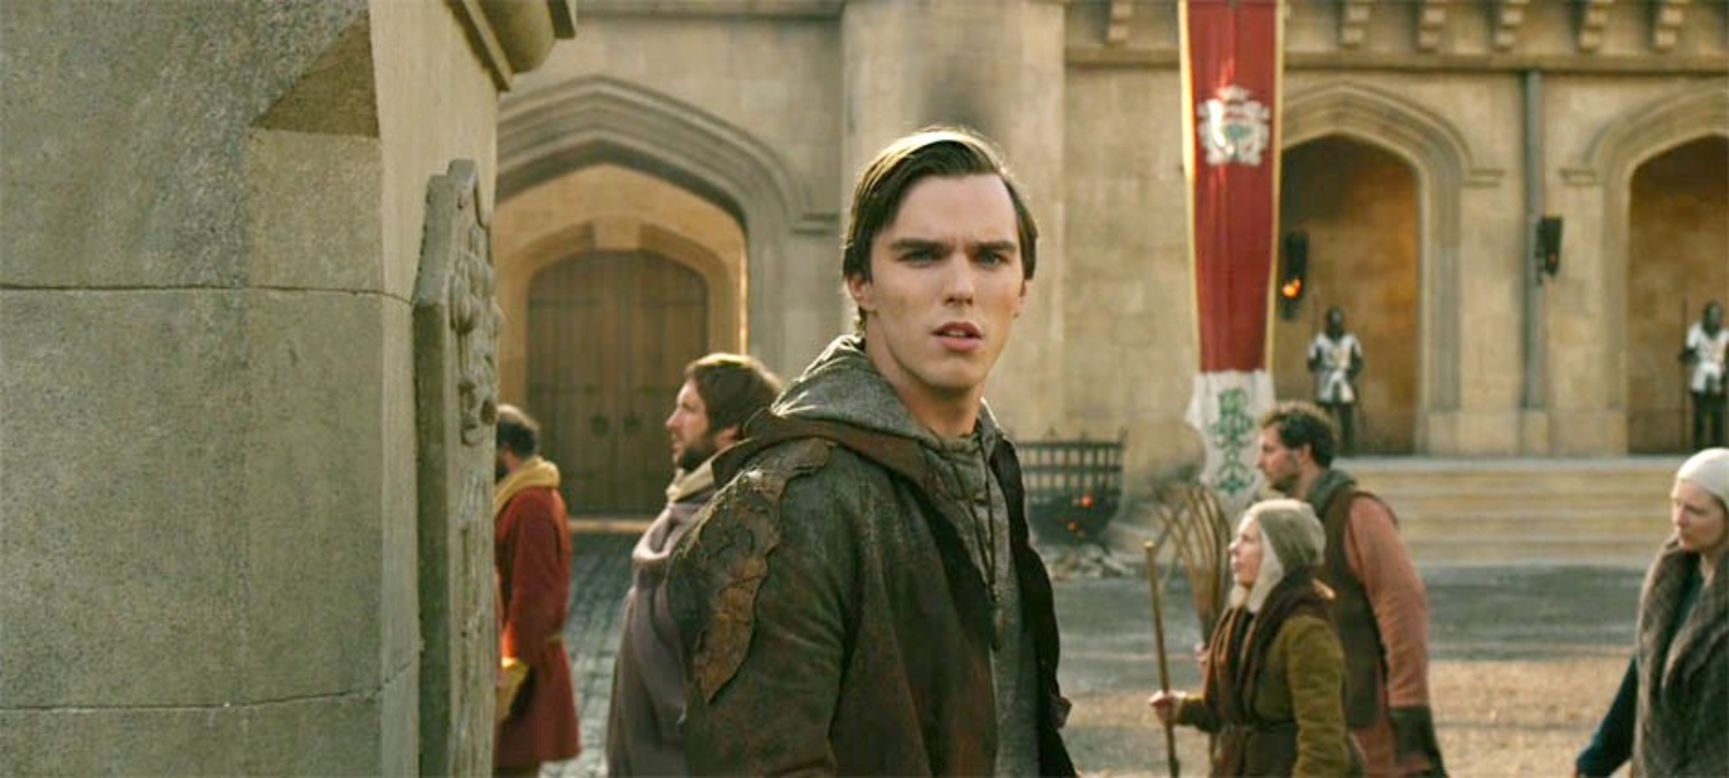 Originally billed as "Jack and the Giant Killer," "Slayer" will hit theaters on March 1. Director Bryan Singer's take on the "Beanstalk" fairytale stars Nicholas Hoult, Stanley Tucci and Ewan McGregor. Though the film's trailer doesn't put much emphasis on the love story, Jack's mission to save Princess Isabelle (Eleanor Tomlinson) has got to count for something.